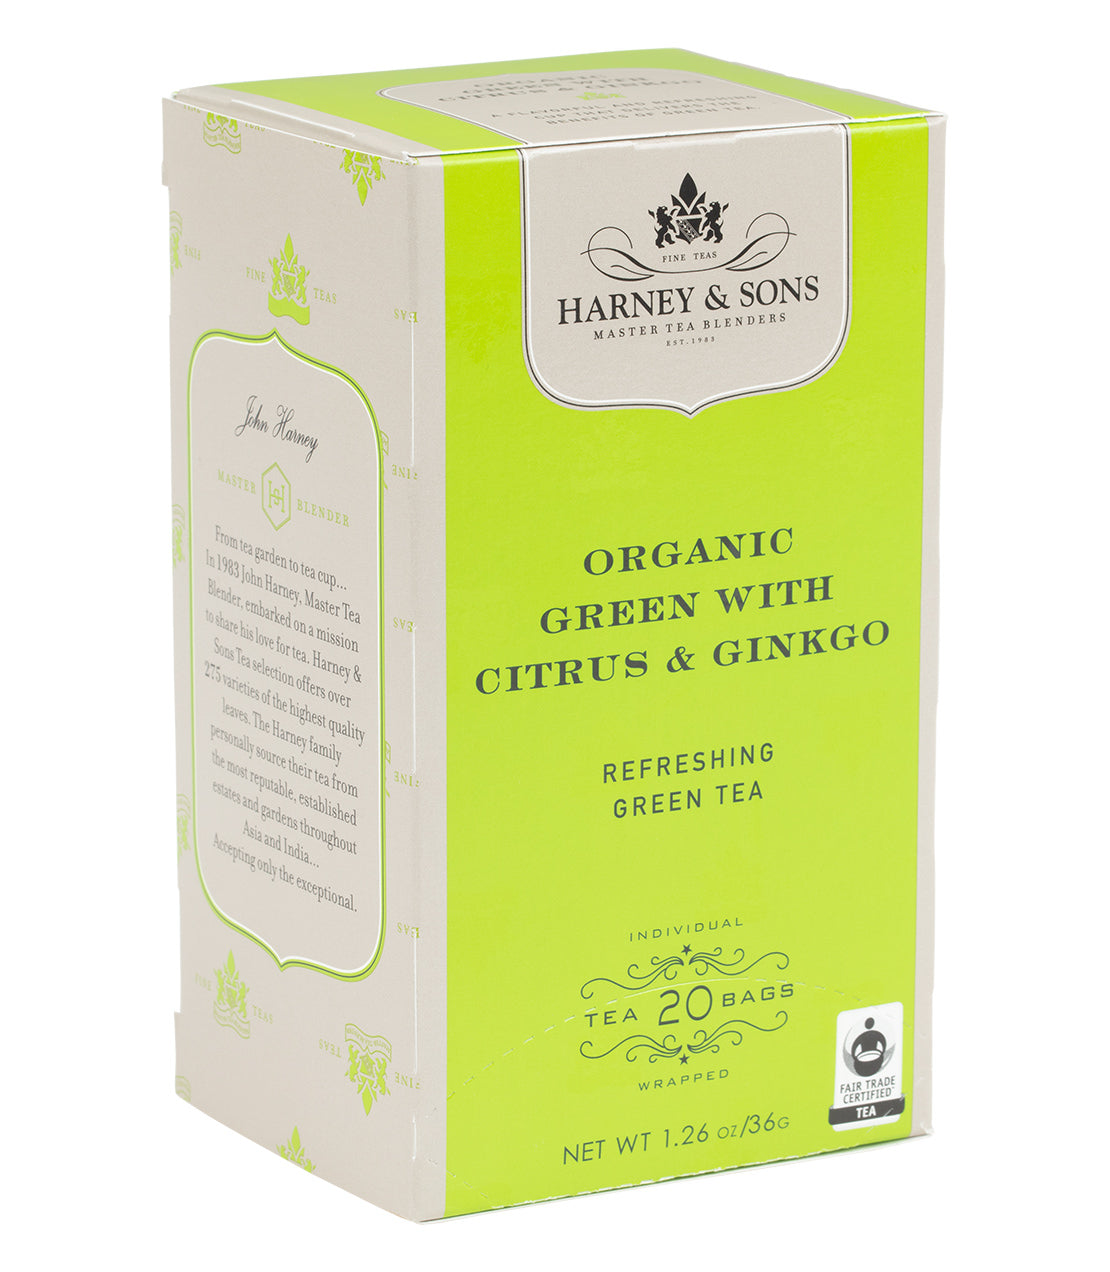 Organic Green with Citrus & Ginkgo